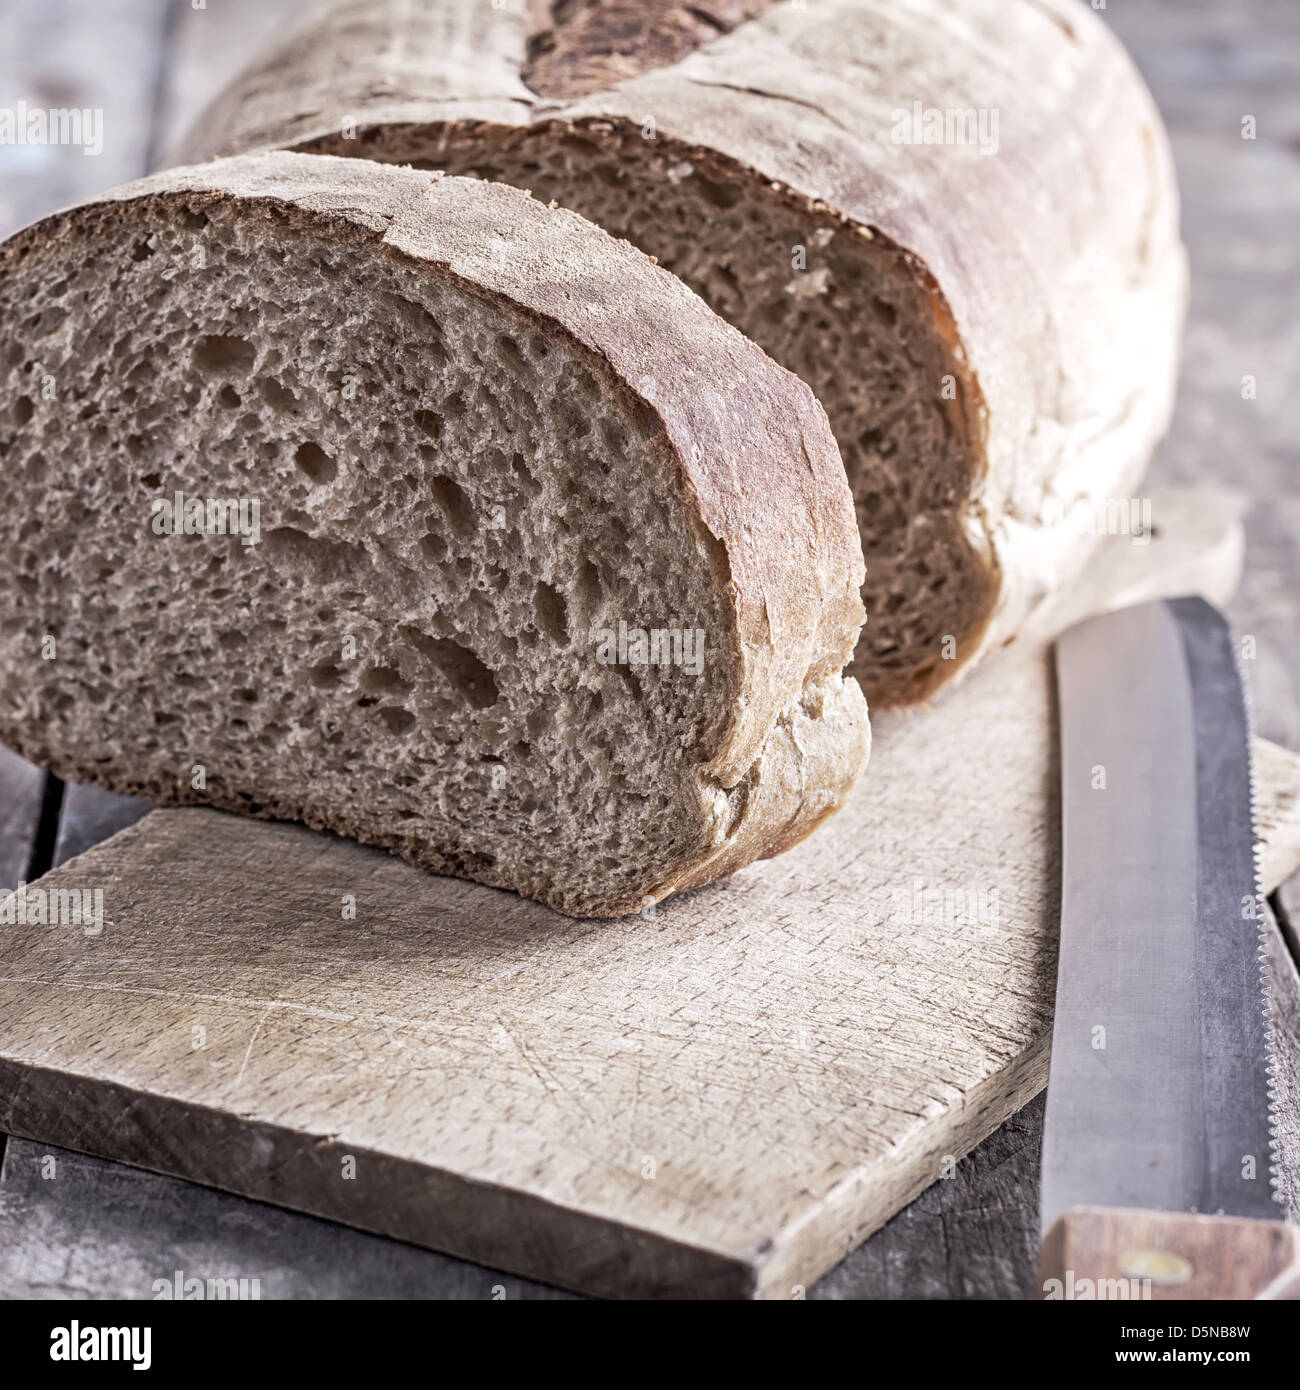 homemade bread and bread knife on table Stock Photo